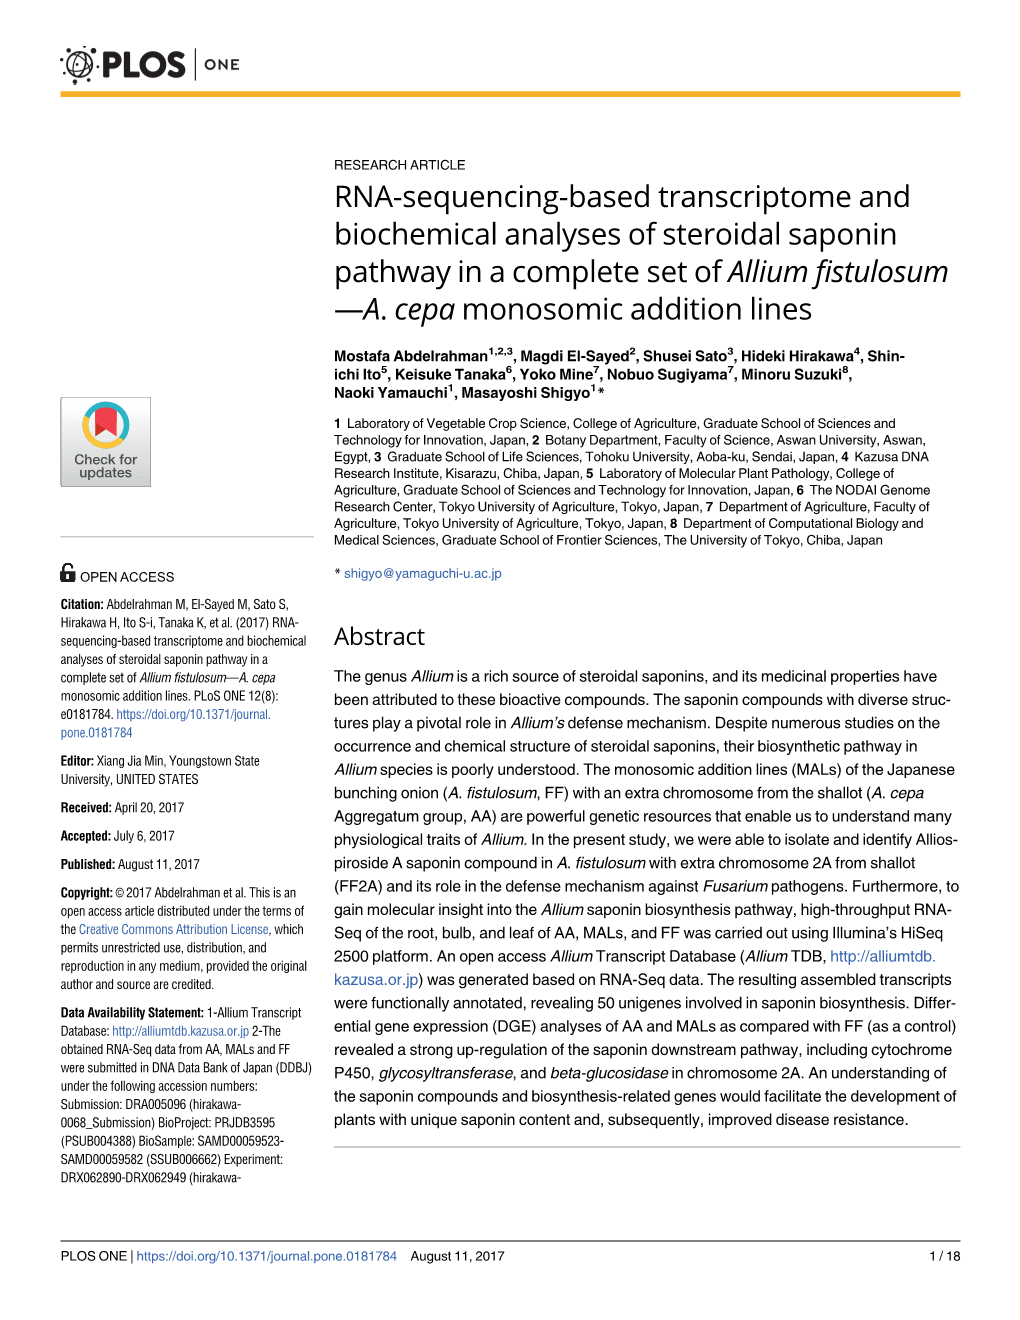 RNA-Sequencing-Based Transcriptome and Biochemical Analyses of Steroidal Saponin Pathway in a Complete Set of Allium Fistulosum —A